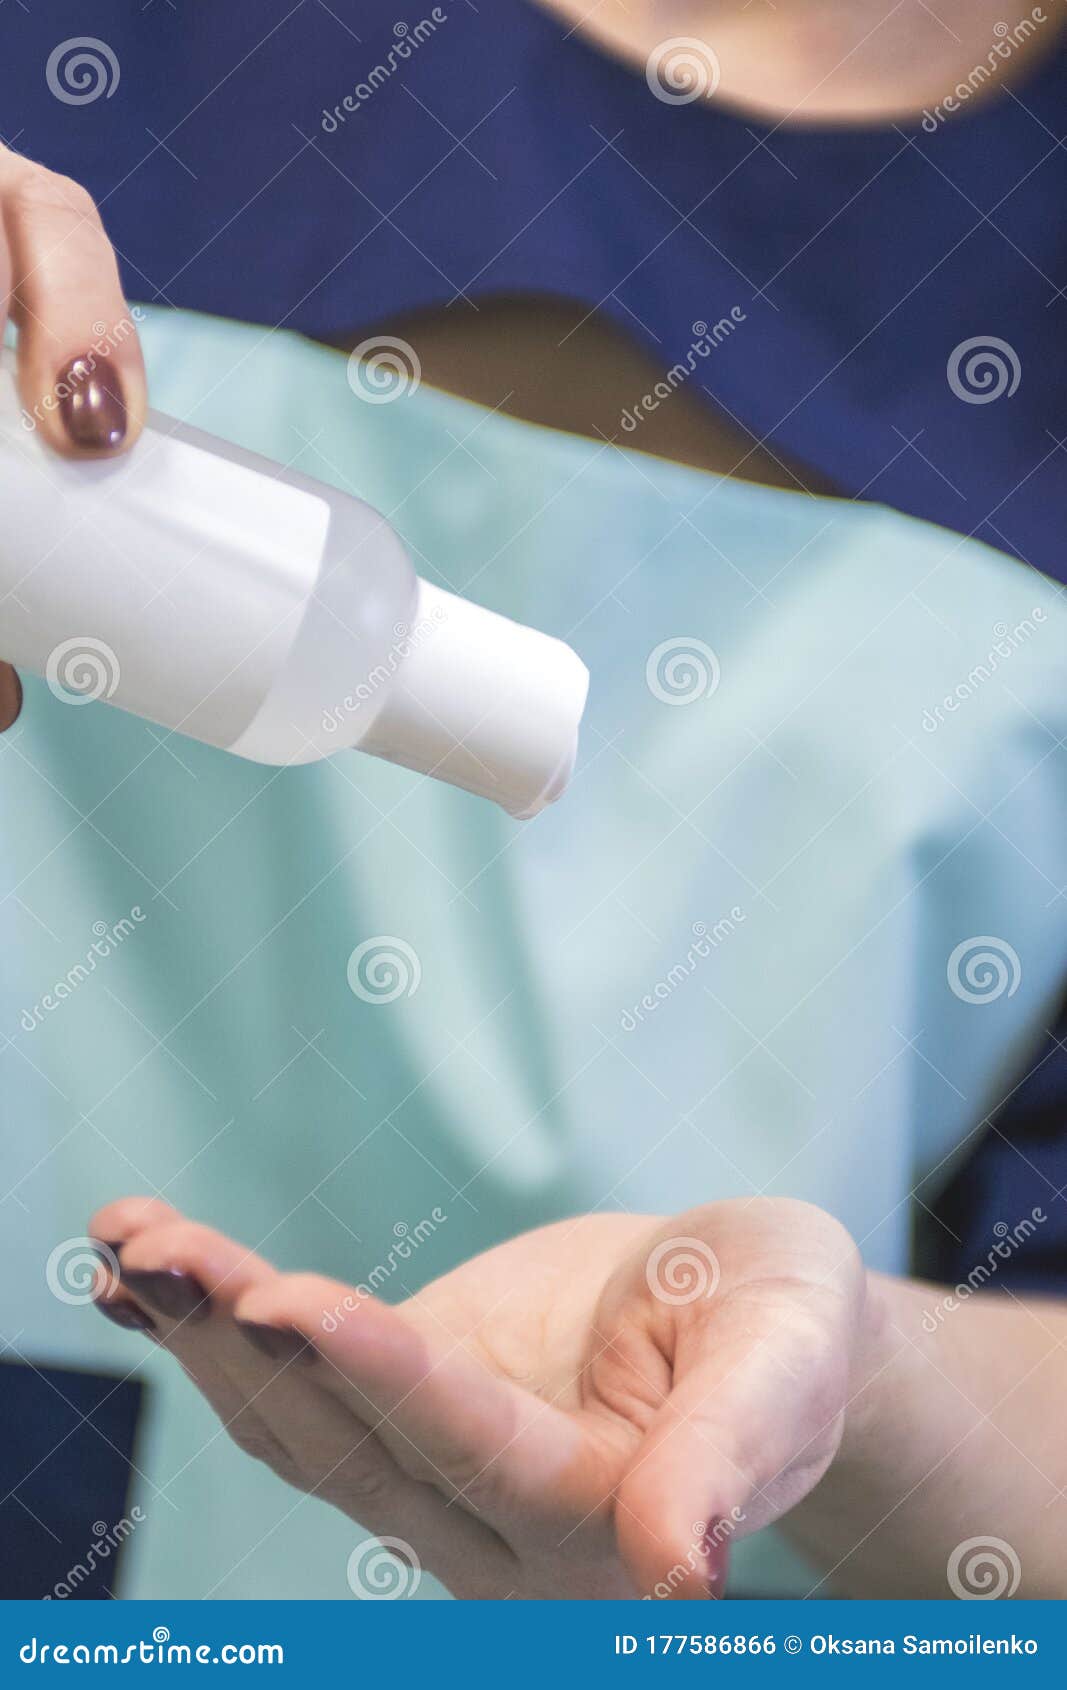 Disinfection Of The Hands Of A Medical Professional